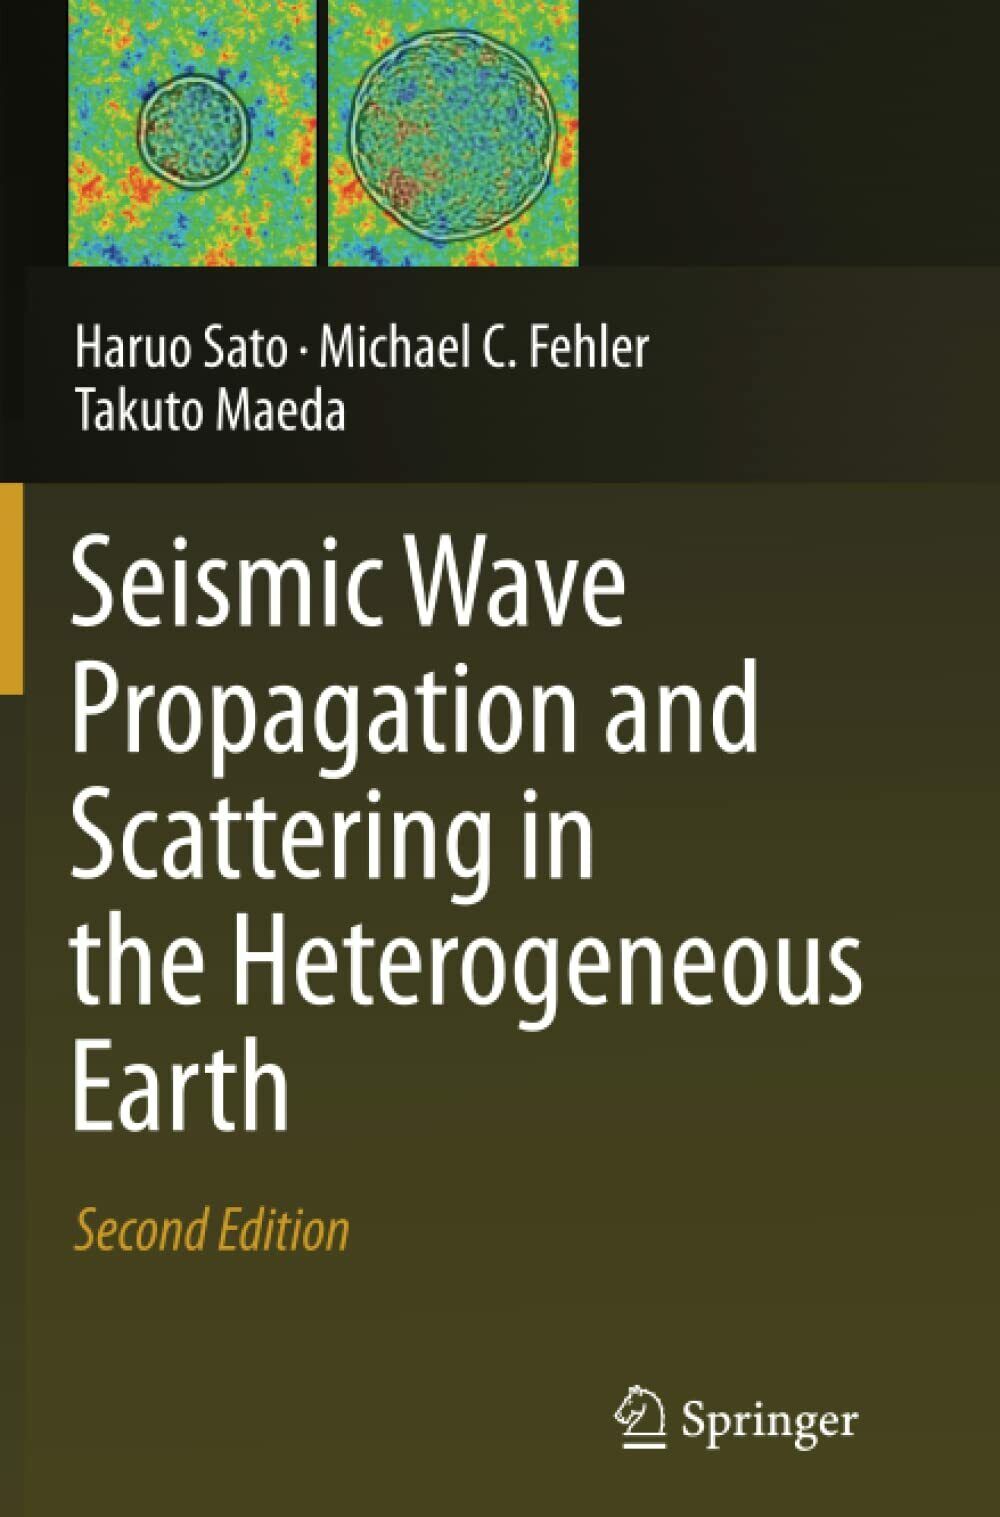 Seismic Wave Propagation and Scattering in the Heterogeneous Earth - 2014